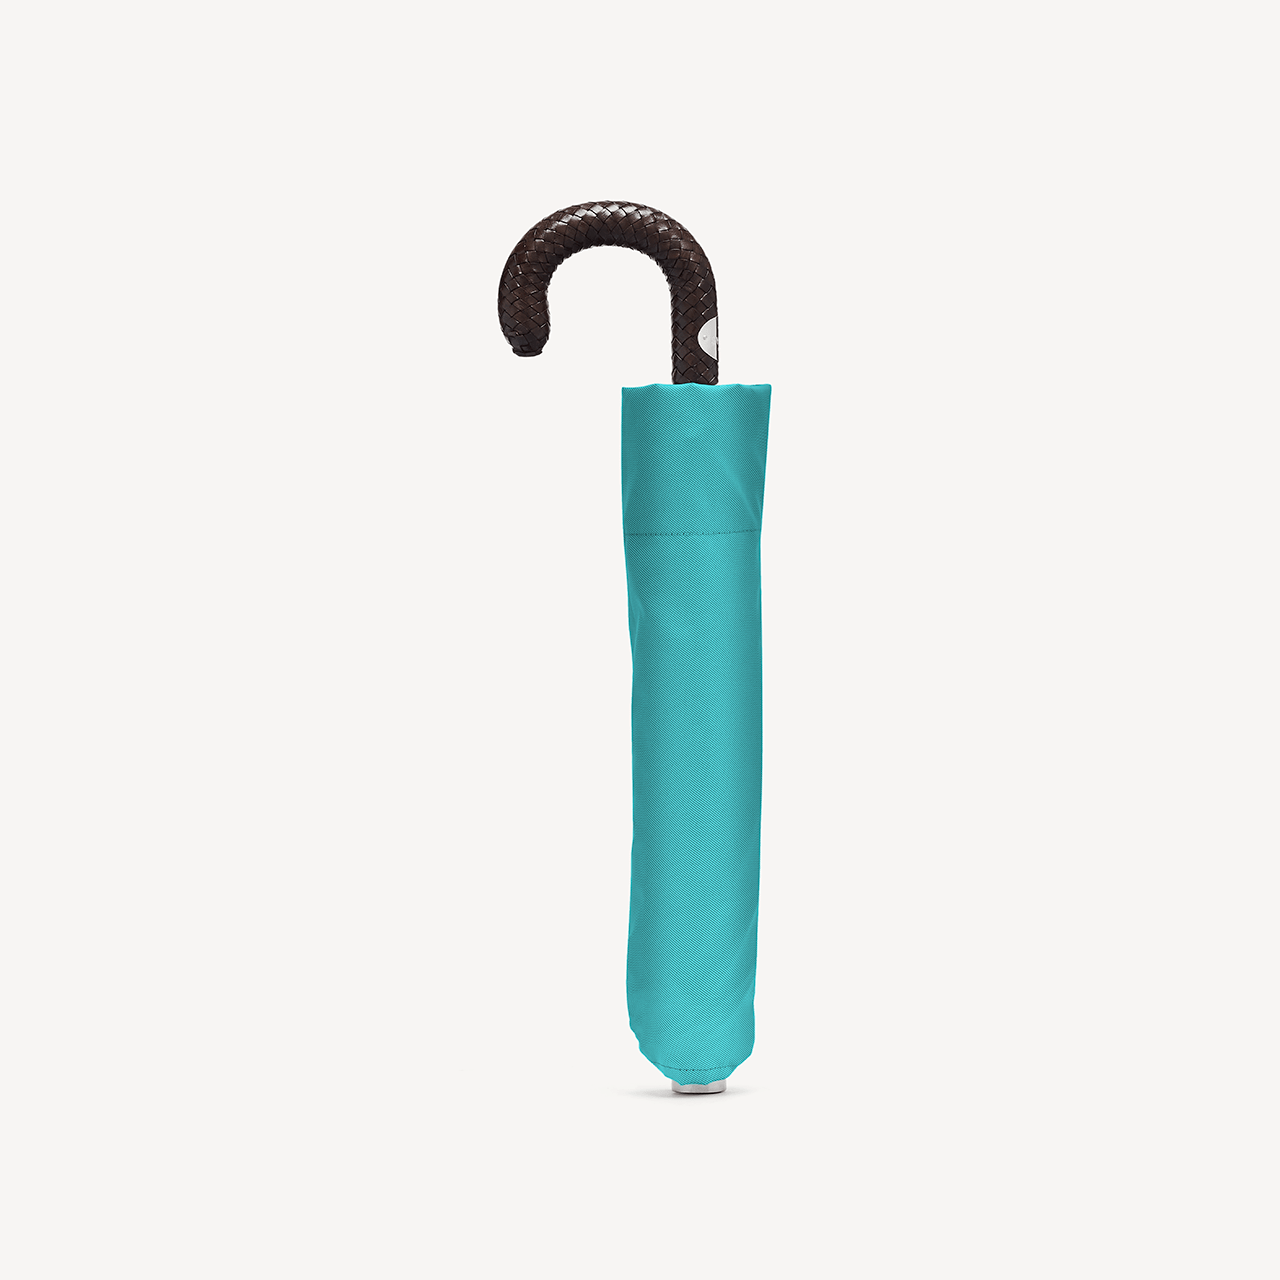 Collapsible Umbrella with Braided Leather Handle - Aqua - Swaine